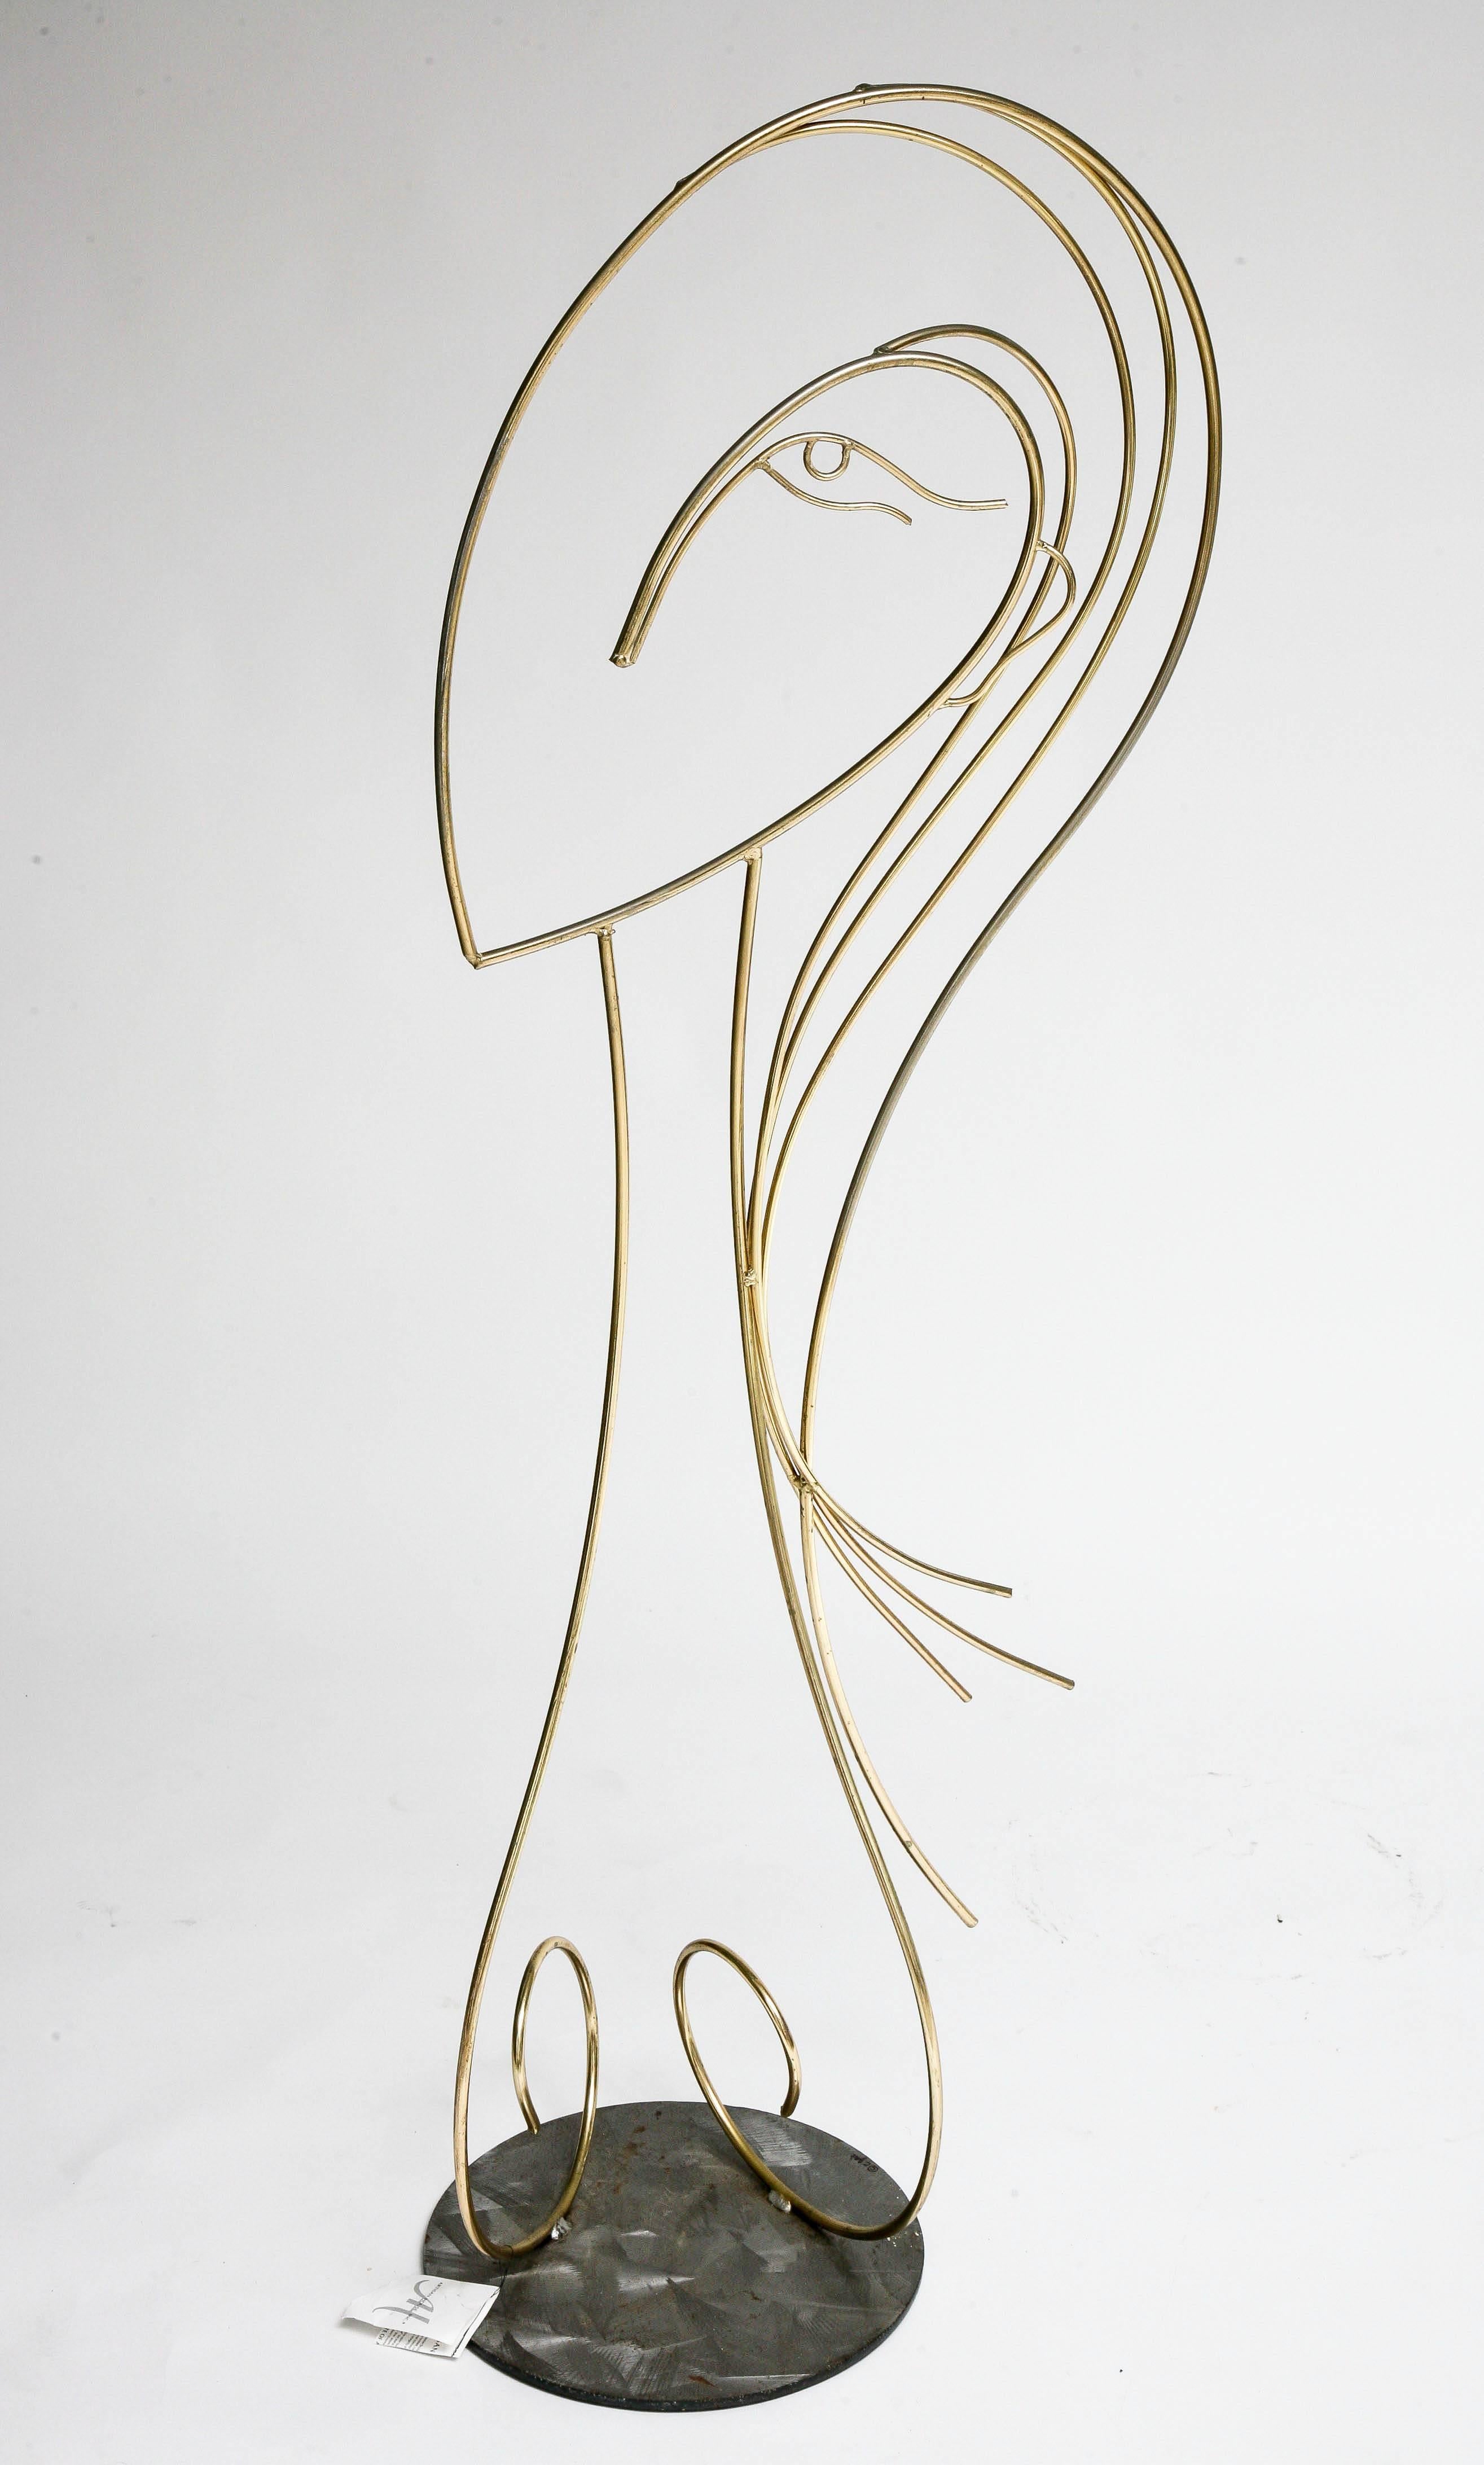 This piece dates for 1970s and was created by the iconic designer and sculpture Curtis Jere. Here he has interpreted the female face in silhouette with flowing hair and elongated neck in a brass finish which glistens as the light hits it.

This